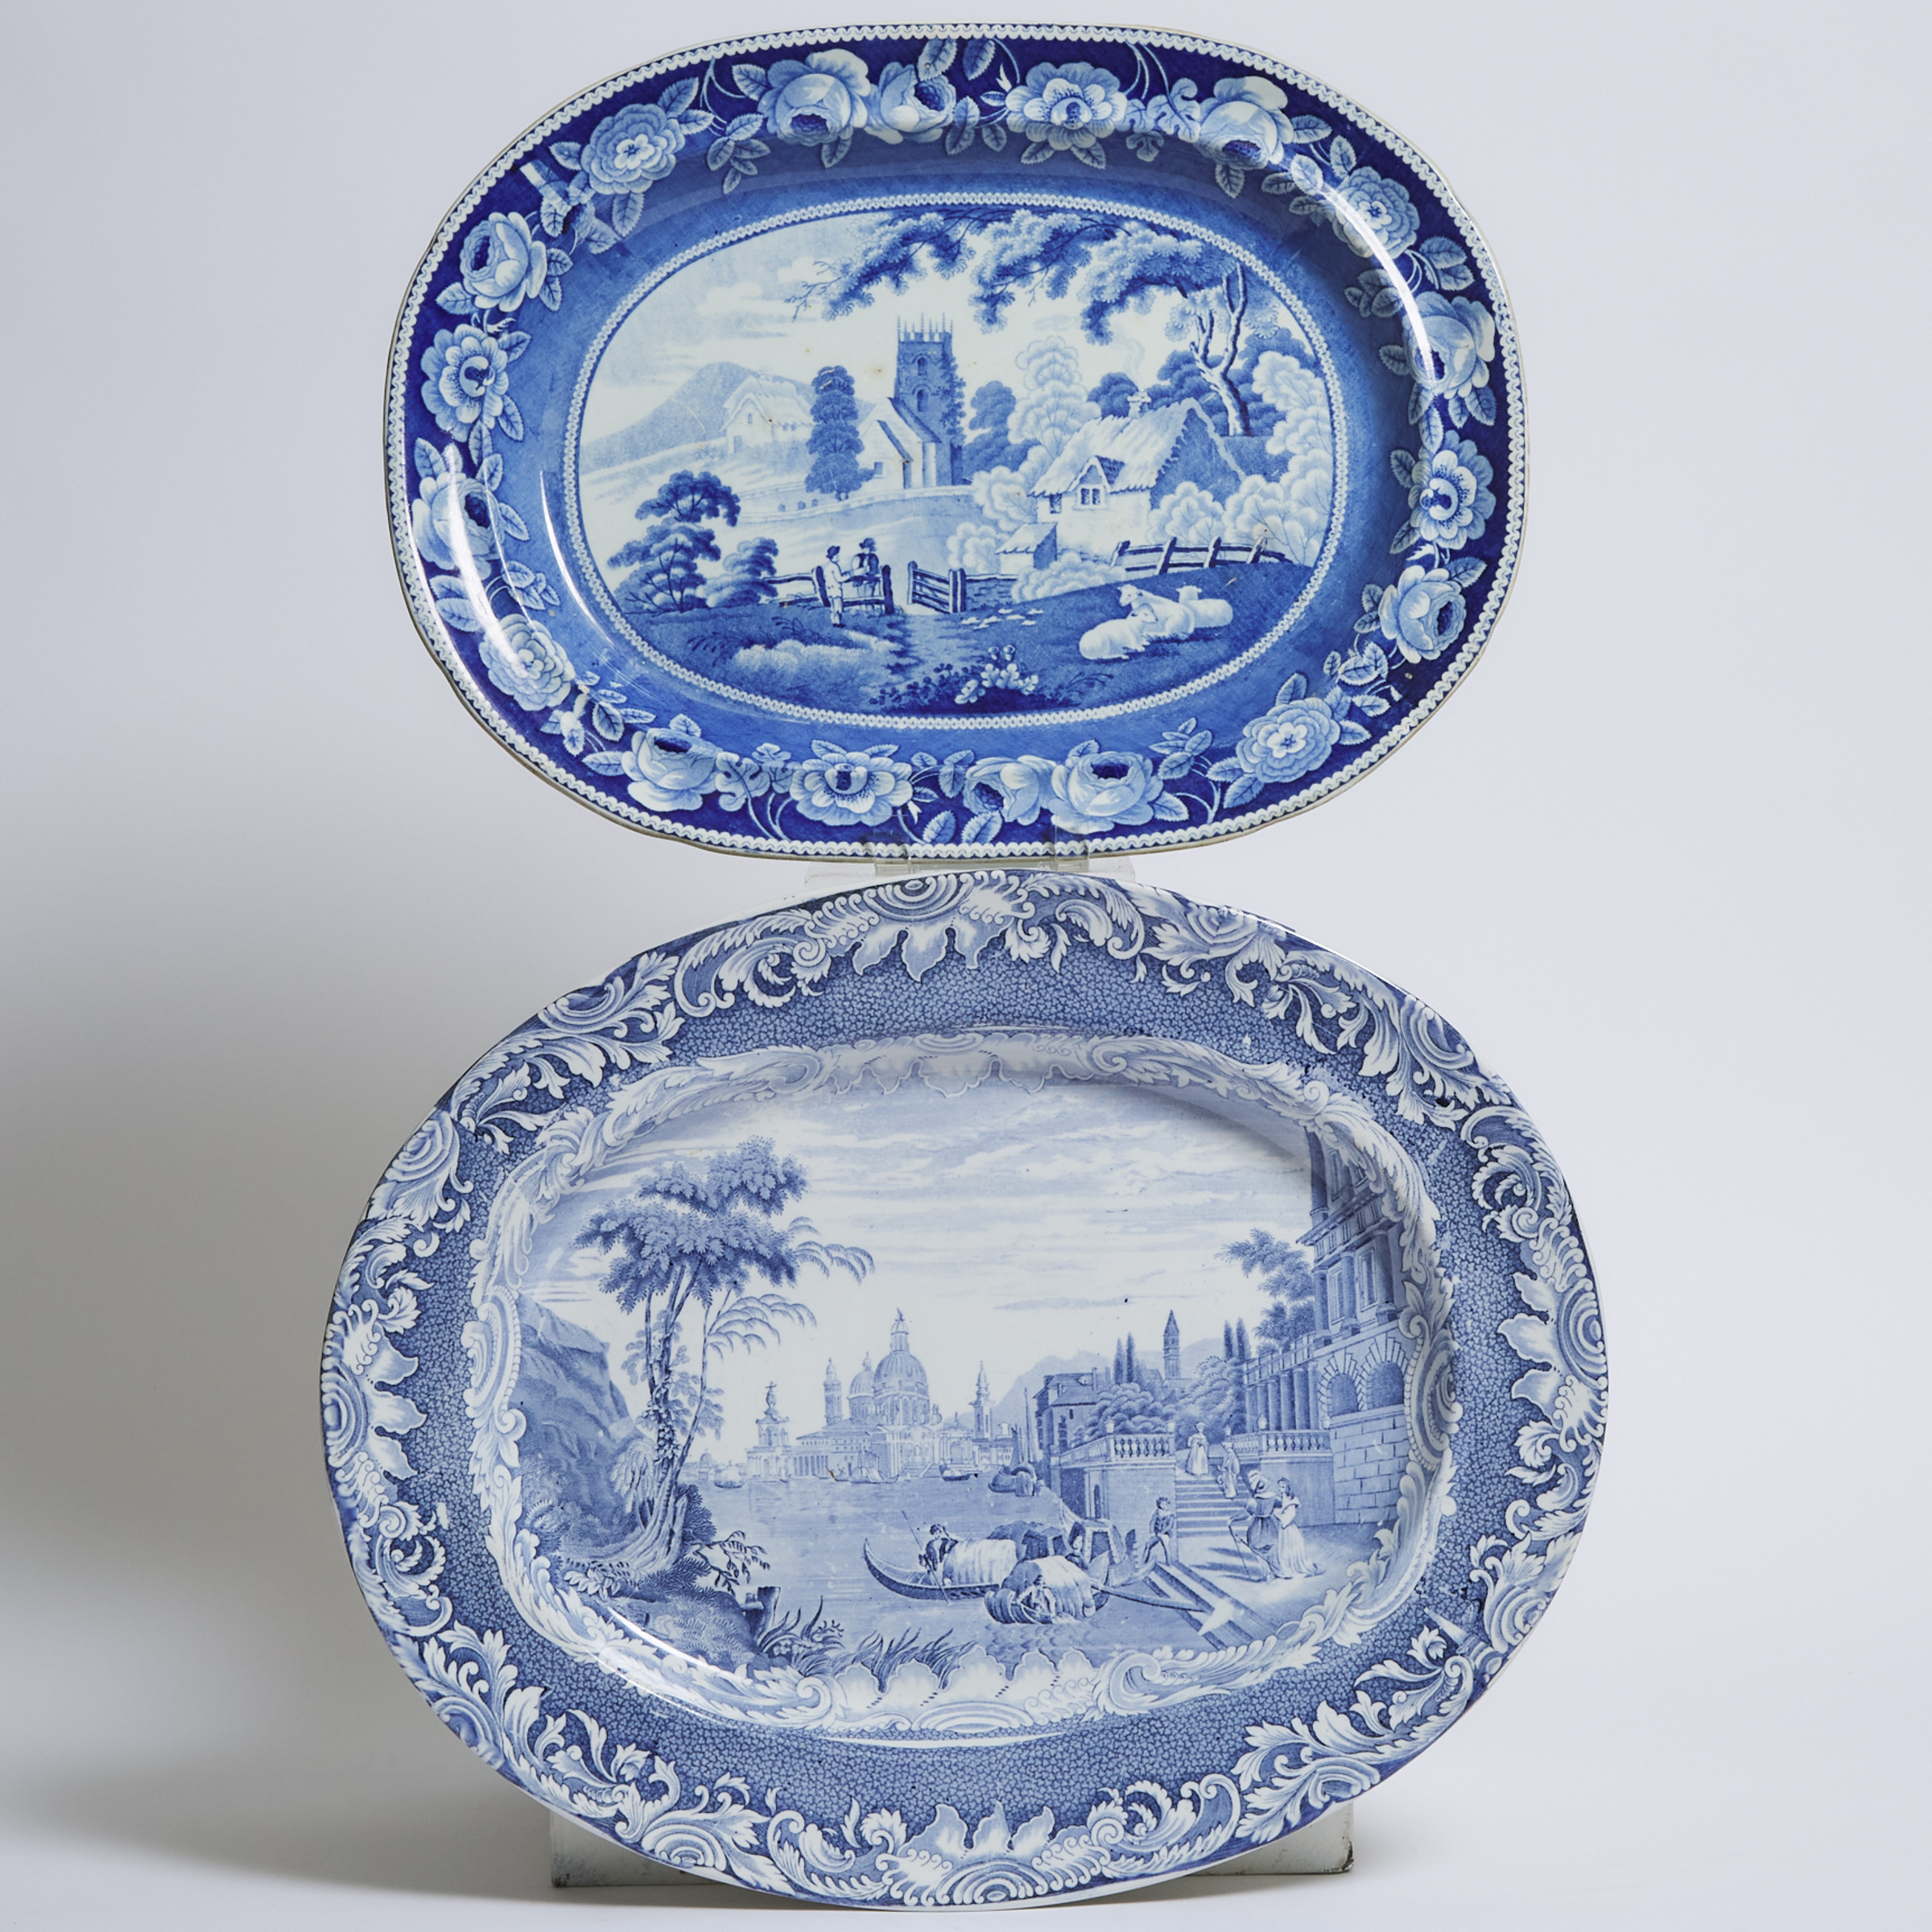 Copeland Blue Printed Oval Platter and a 'Rustic Village' Platter, first half of the 19th century